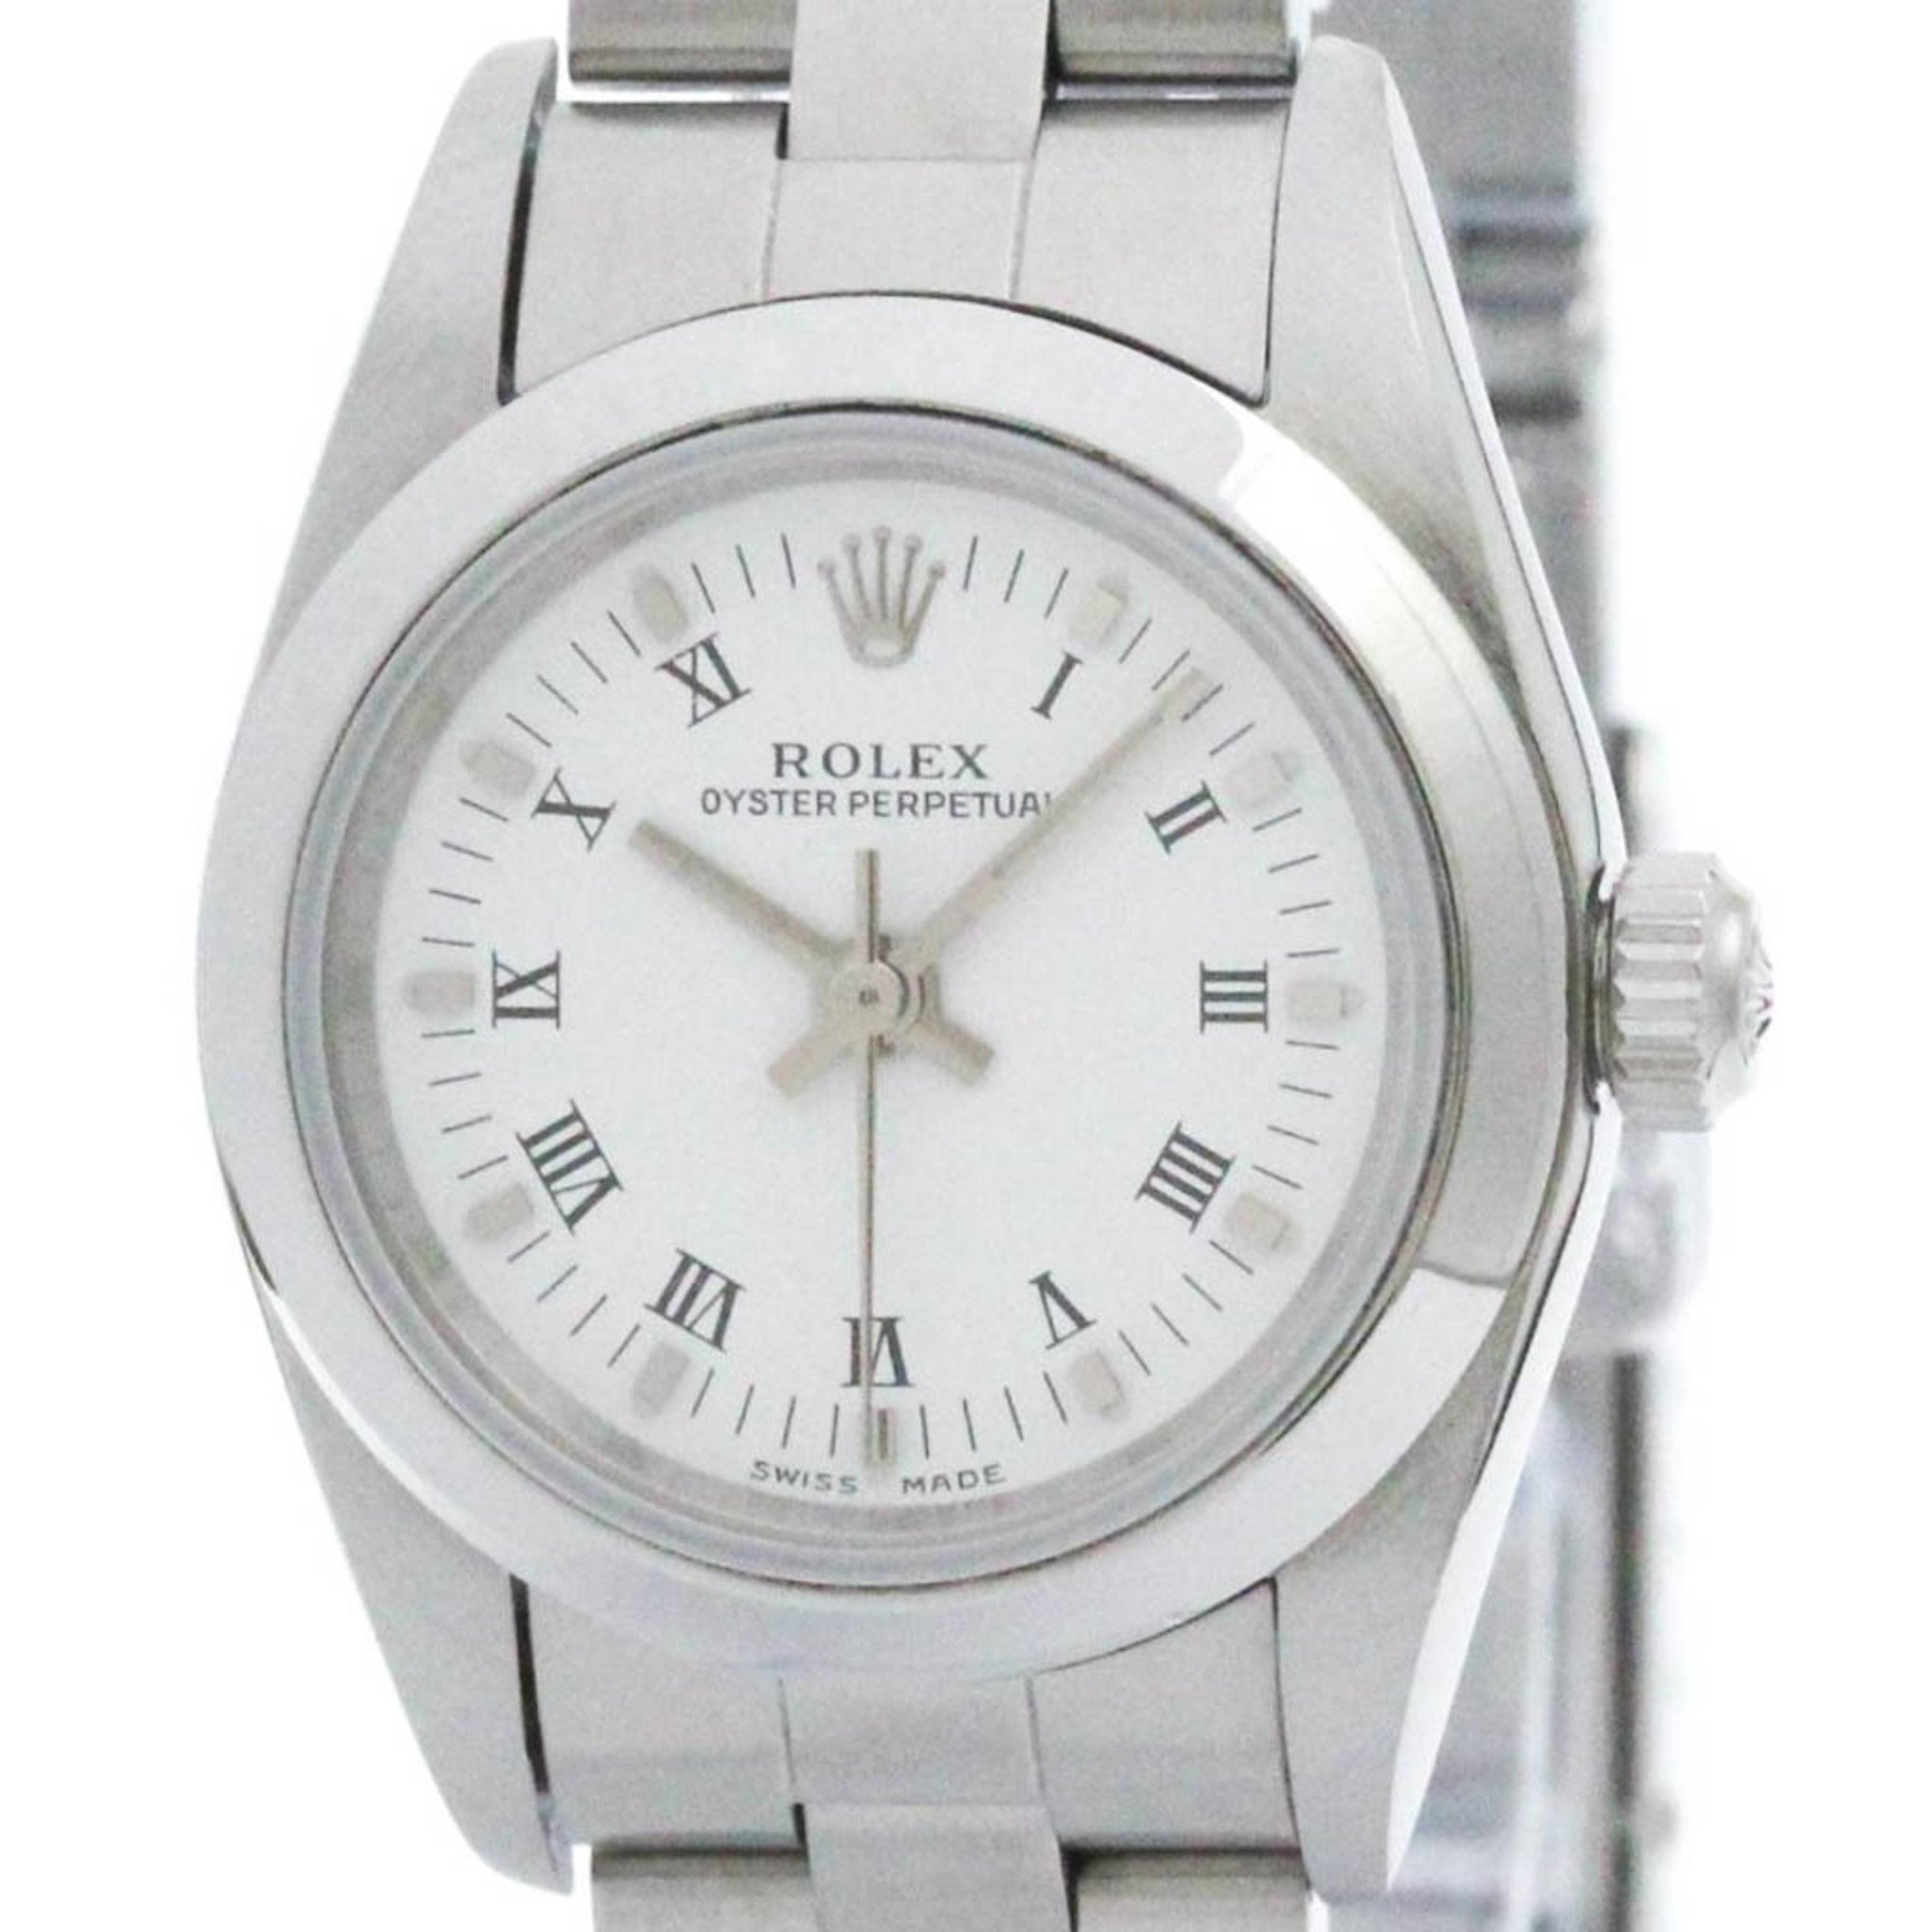 Polished ROLEX Oyster Perpetual 76080 A Serial Automatic Ladies Watch BF573206